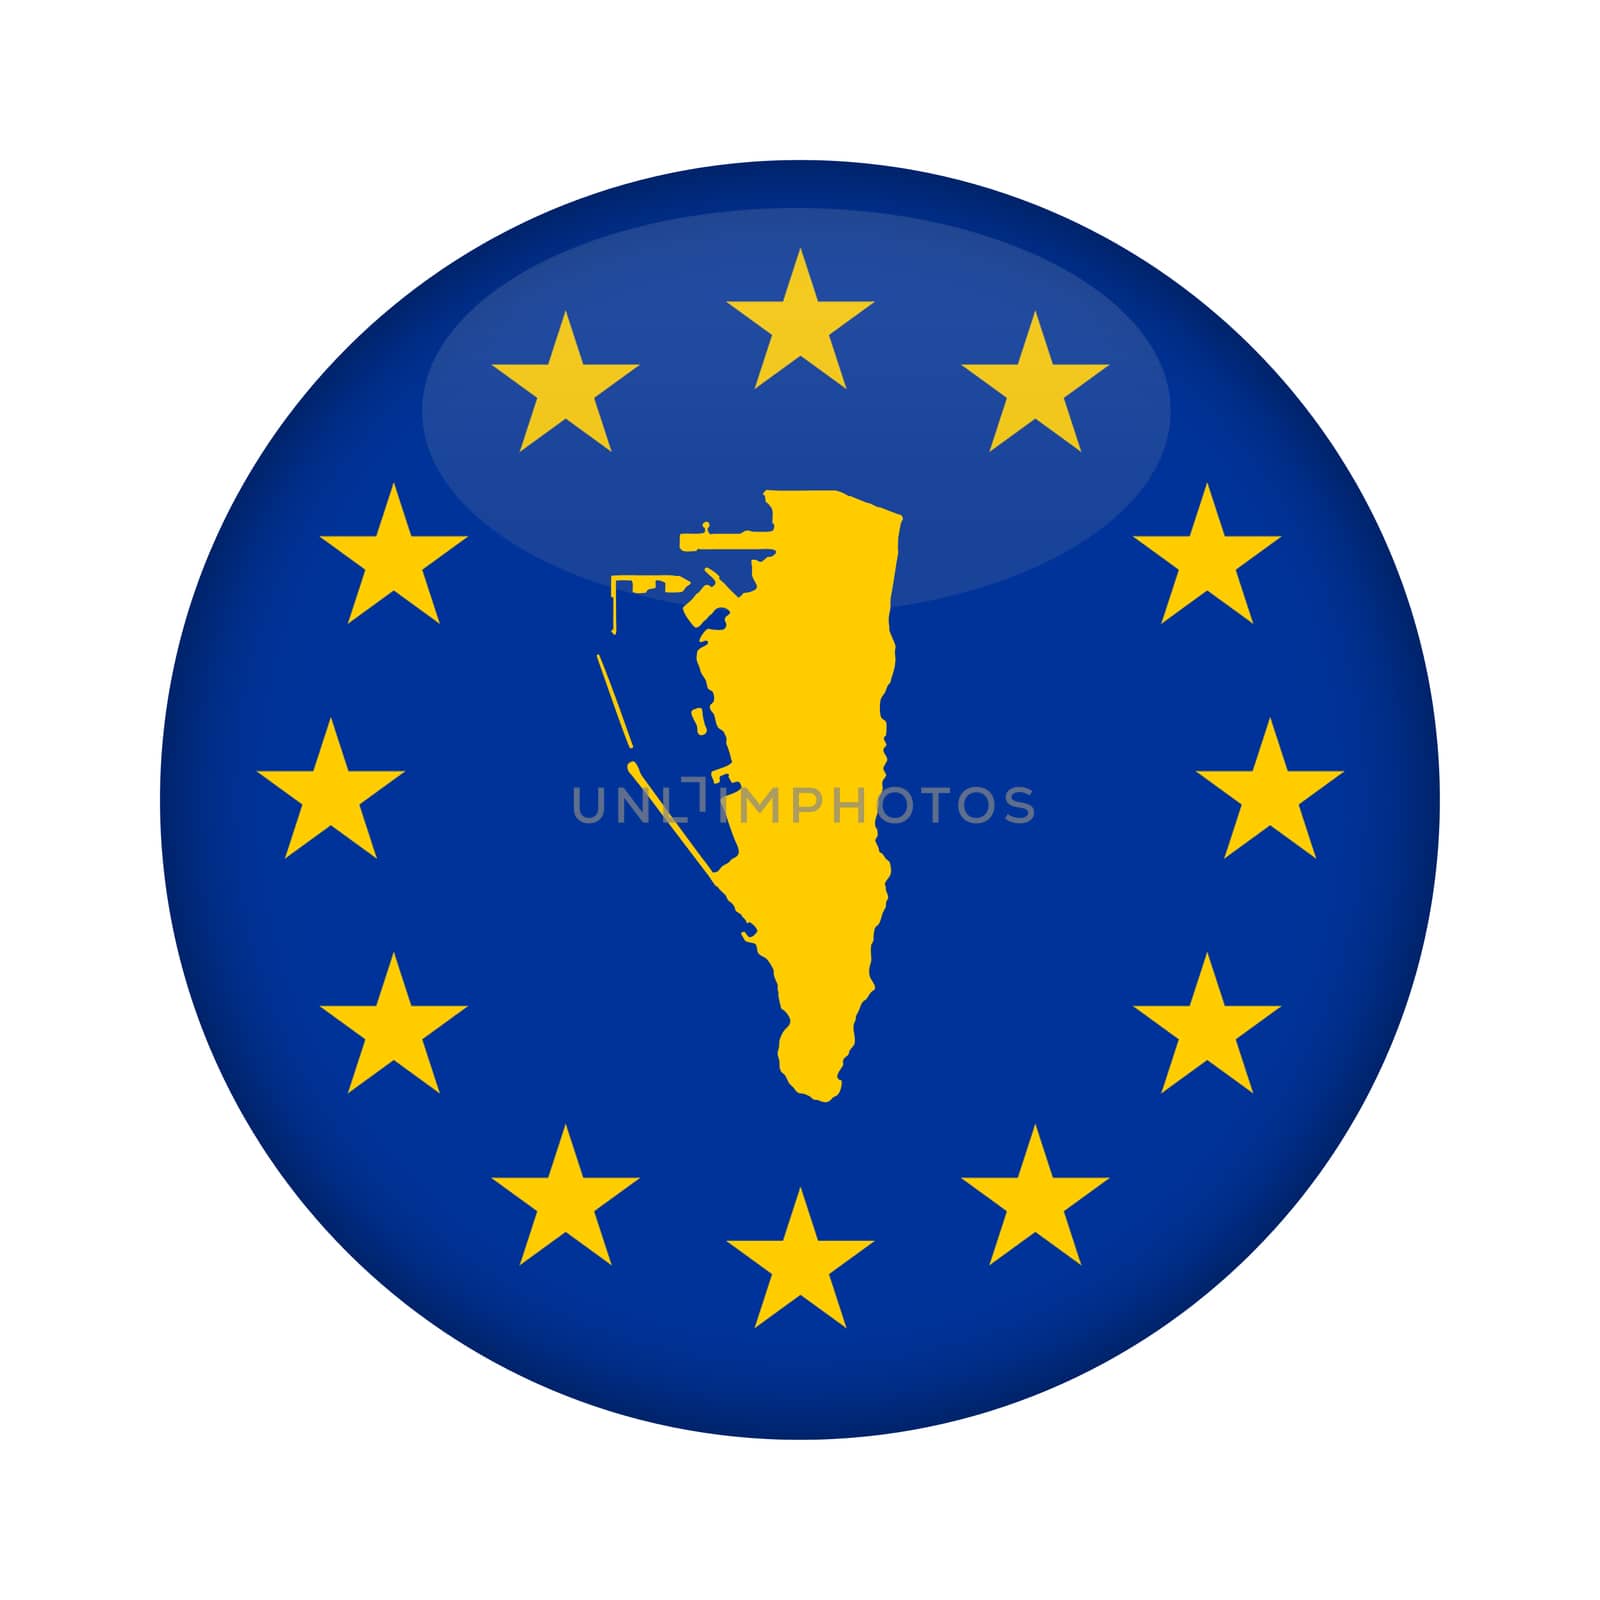 Gibraltar map on a European Union flag button isolated on a white background.